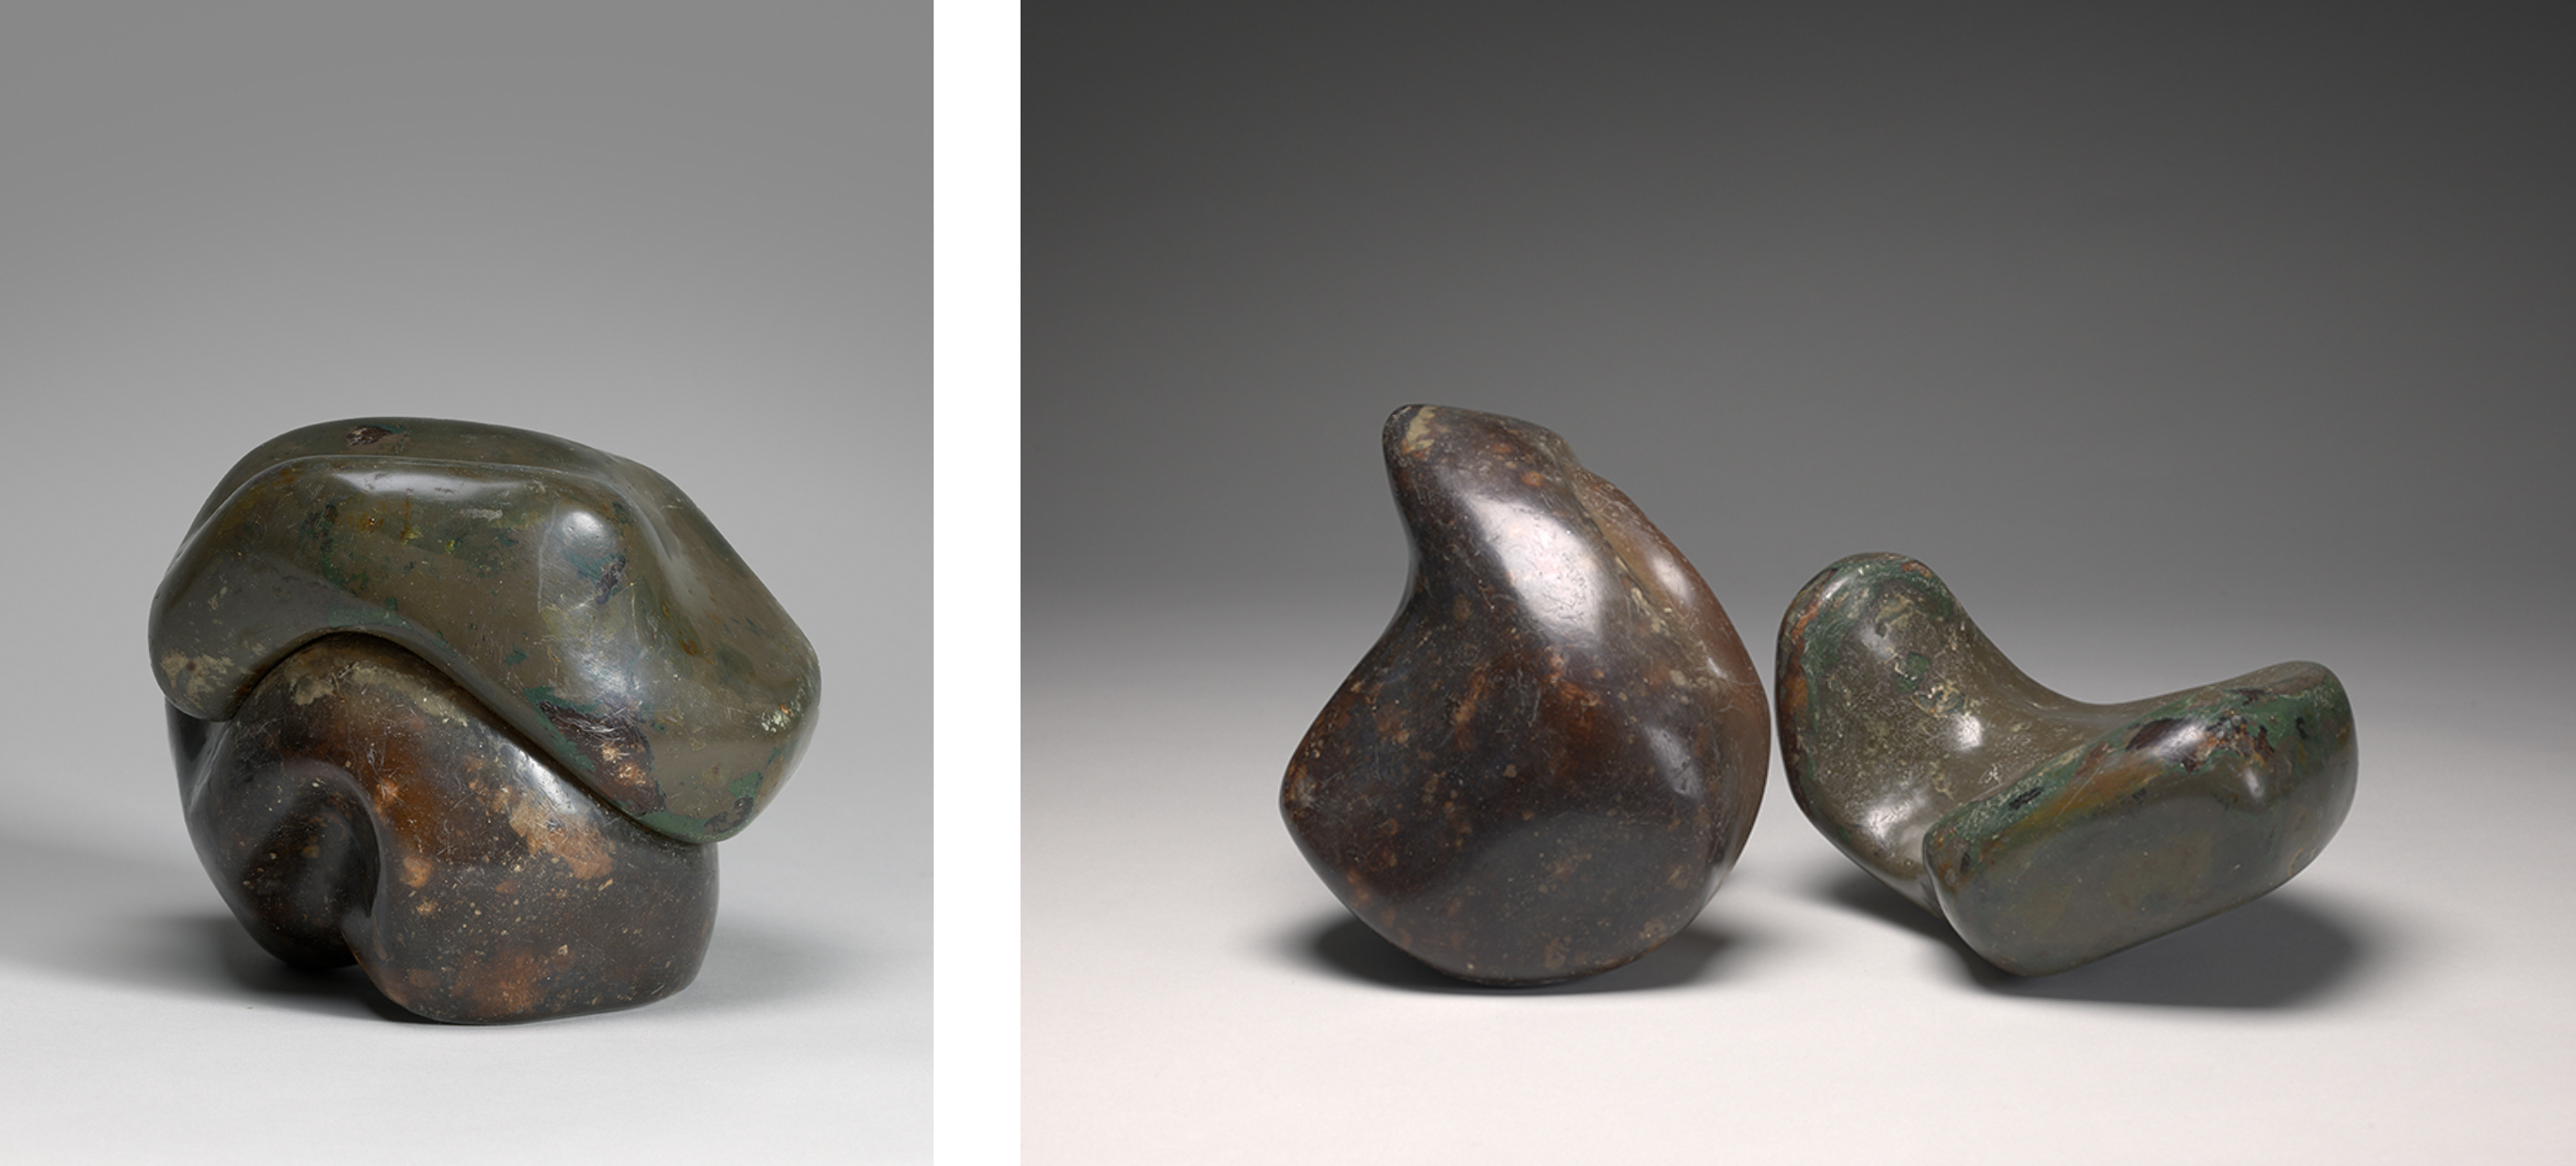 two images of sculpture in two undulating parts that fit together in a cube-like shape; smooth yet textured surface; one half is more green in tone, other half is a richer brown; left: two pieces fit together; right: two pieces separate and sitting next to each other